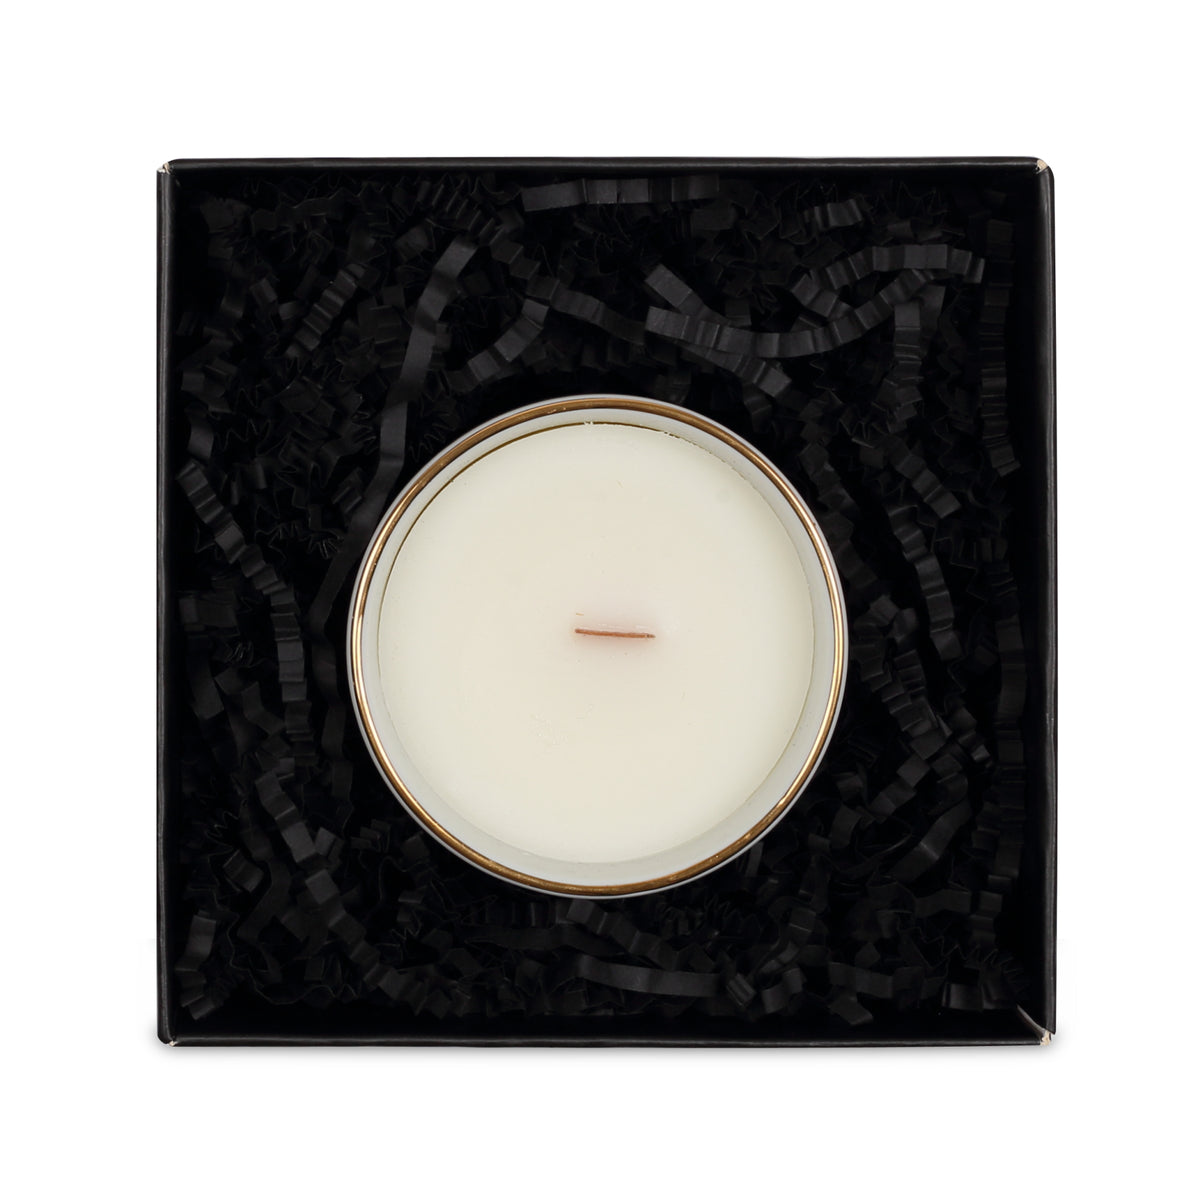 Bold Collection - Candle